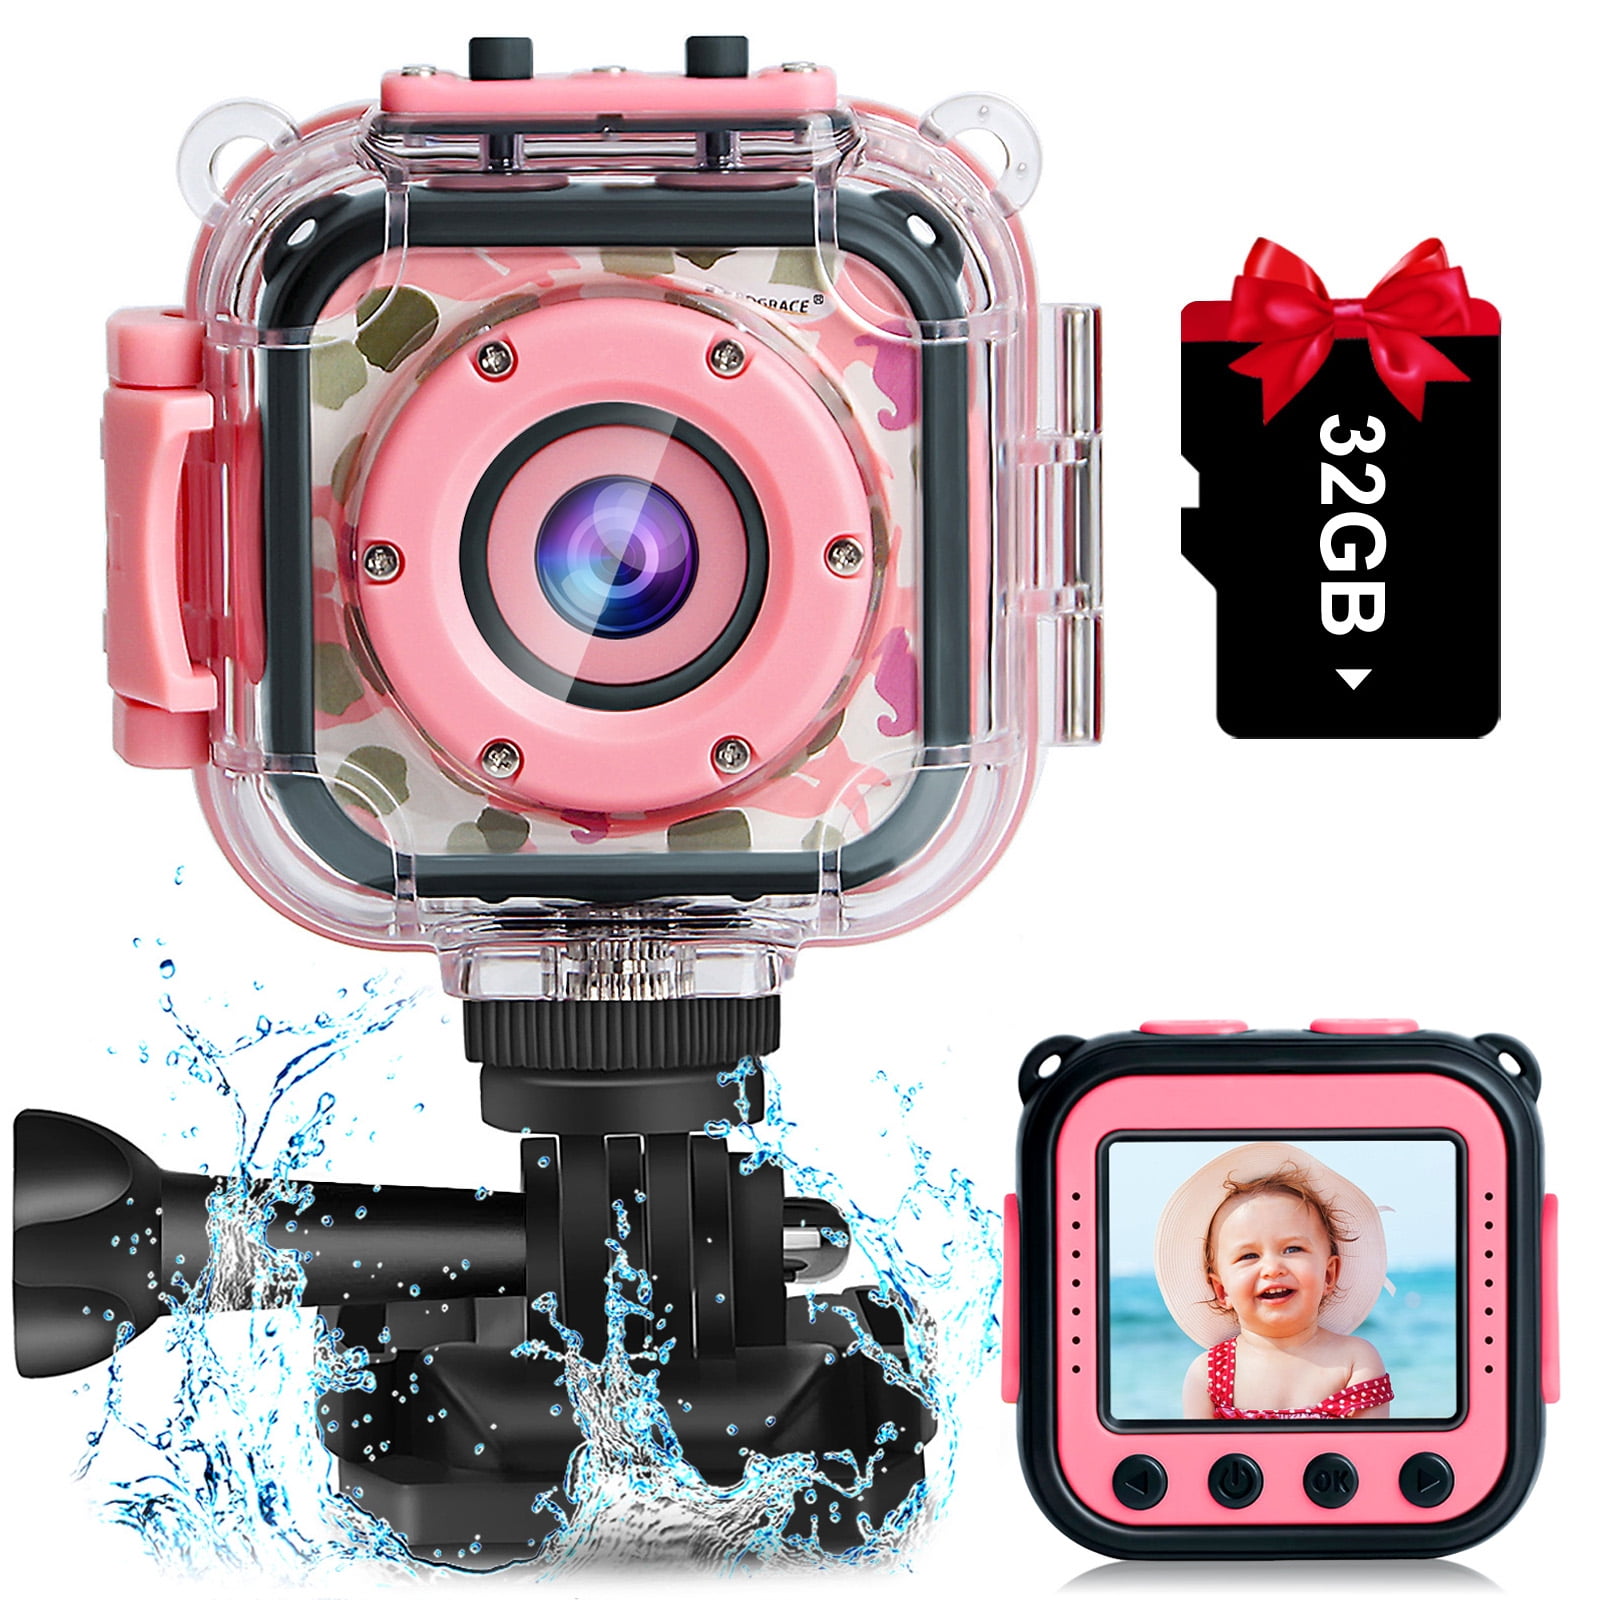 Pink KIDCASE Fits Ourlife Kids Camera with Video Camera Charger and Accessories 